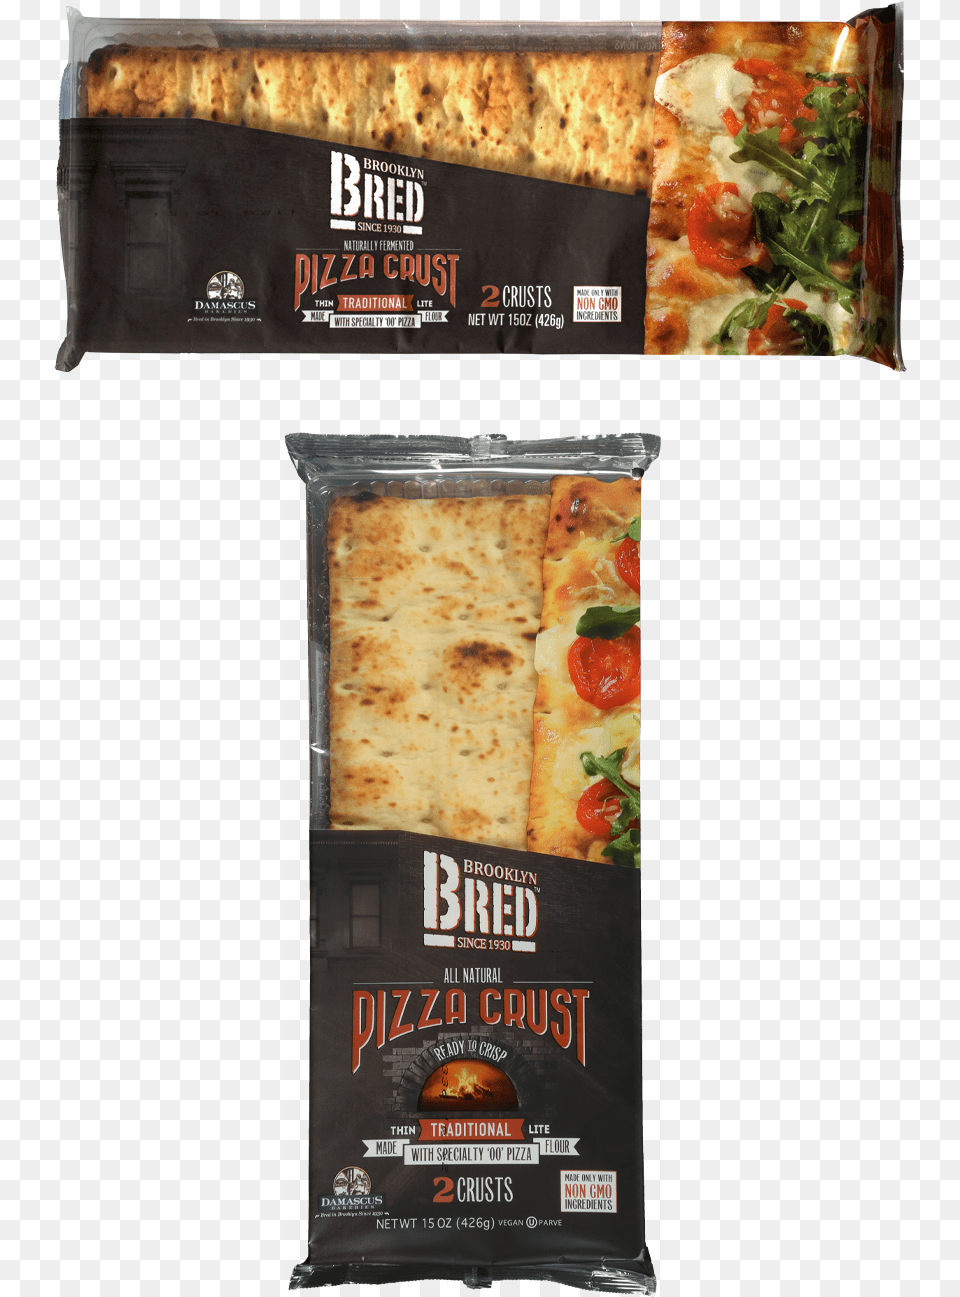 Brooklyn Bred Pizza Crust Traditional Product Package Ancient Grains Pizza Crust, Advertisement, Food, Poster, Bread Png